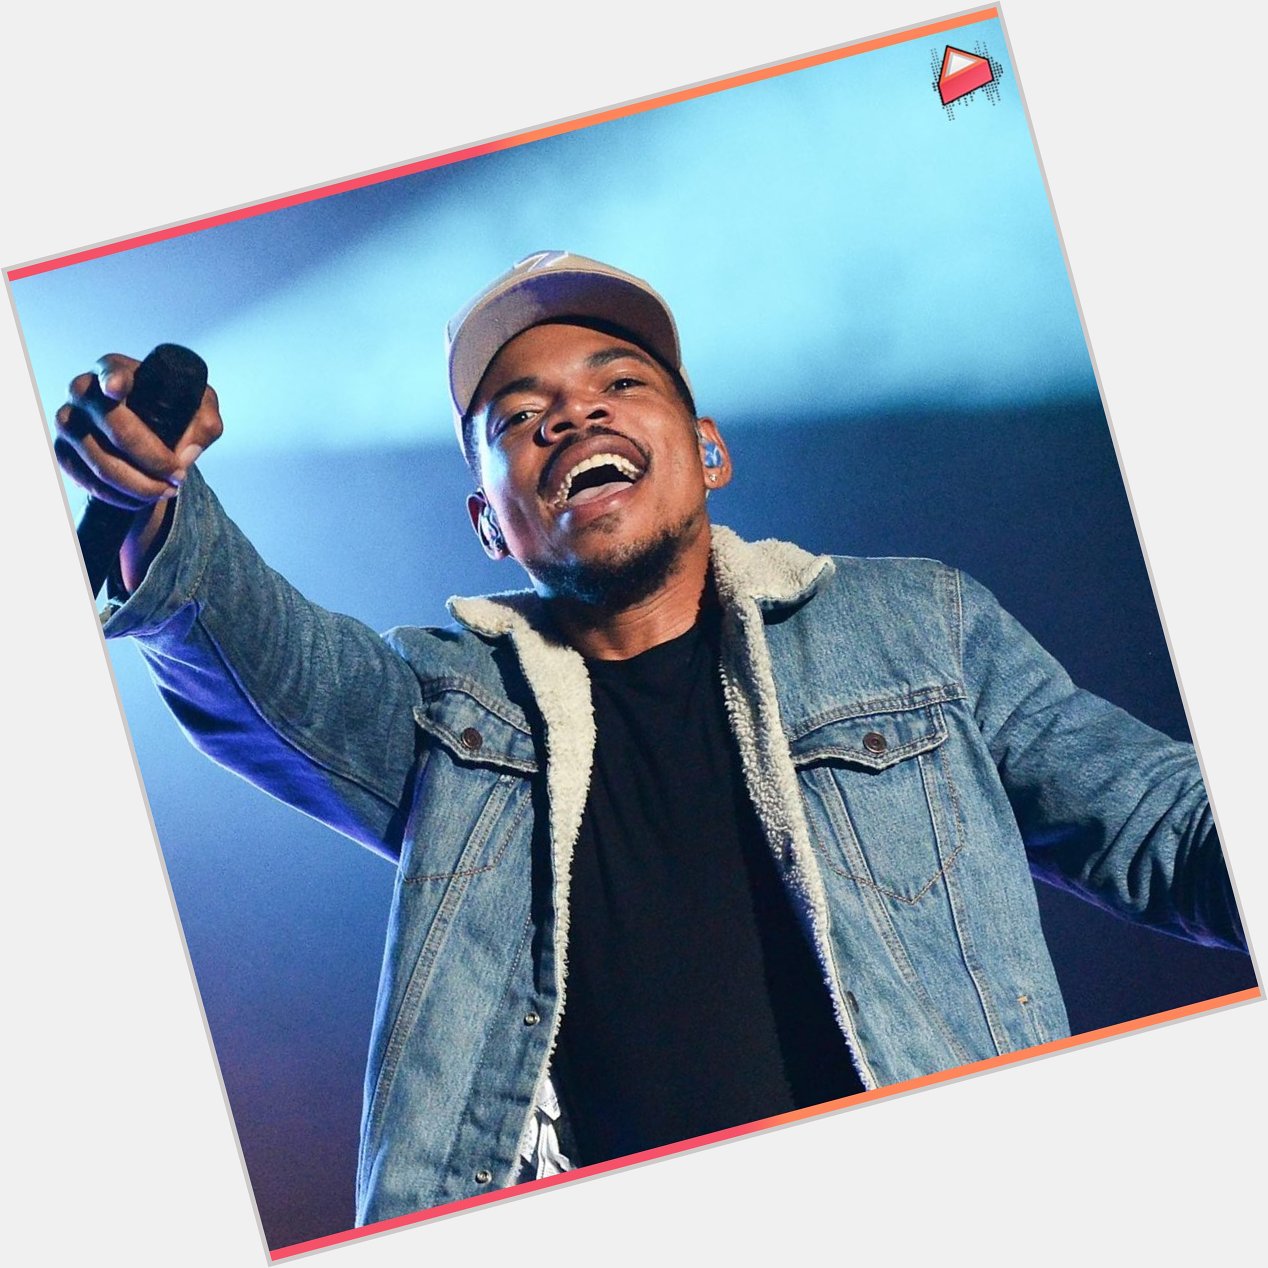 Happy 30th birthday to Chance The Rapper 